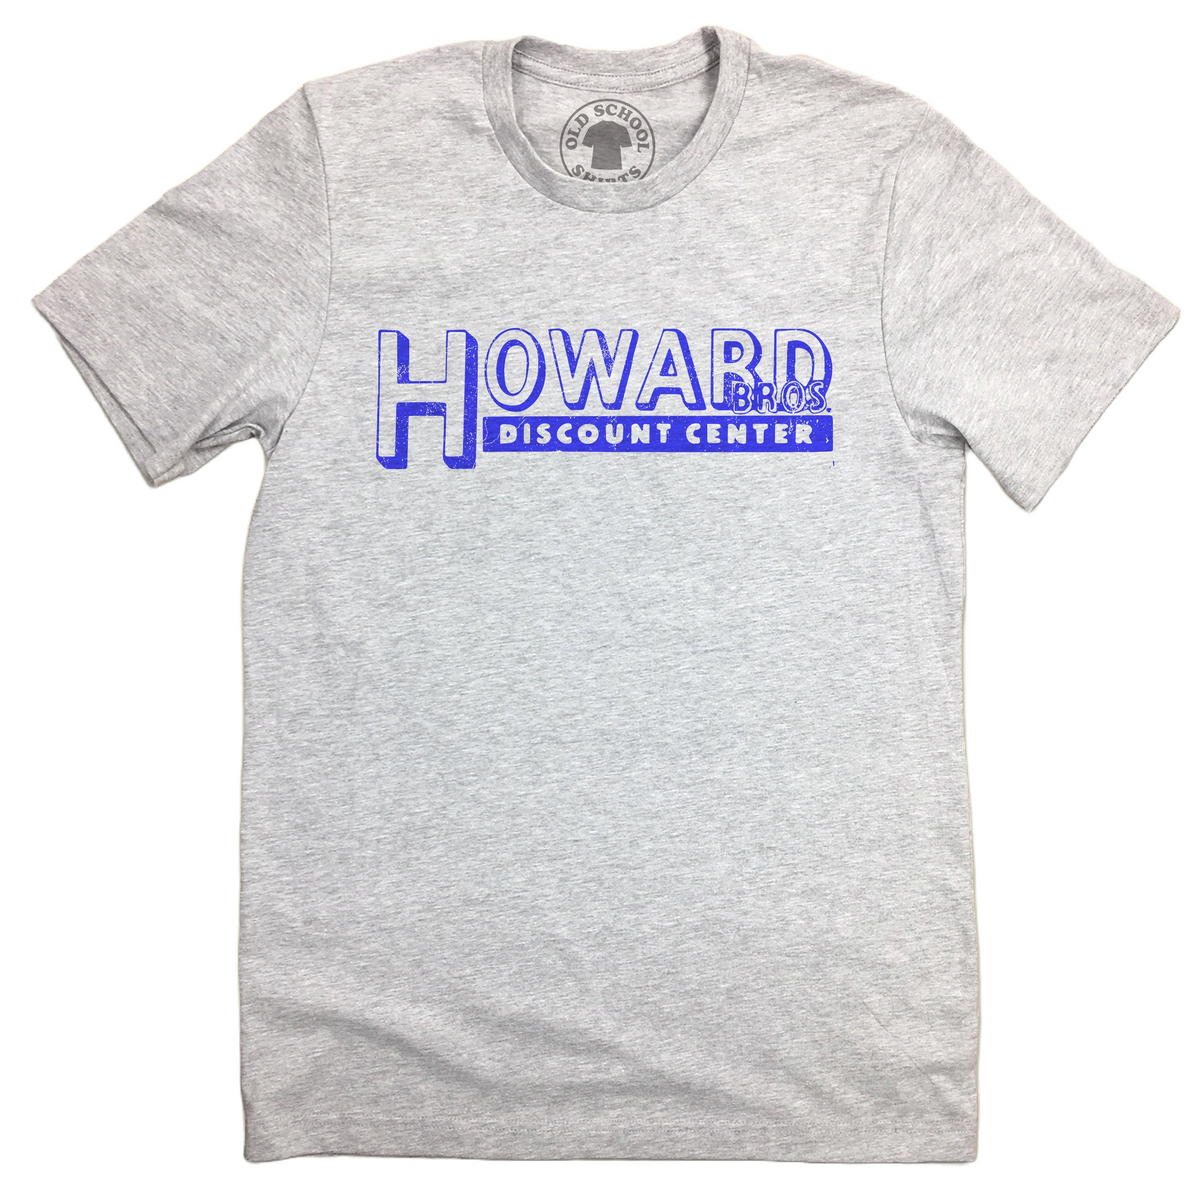 Howard Brothers Discount Center Unisex Tee